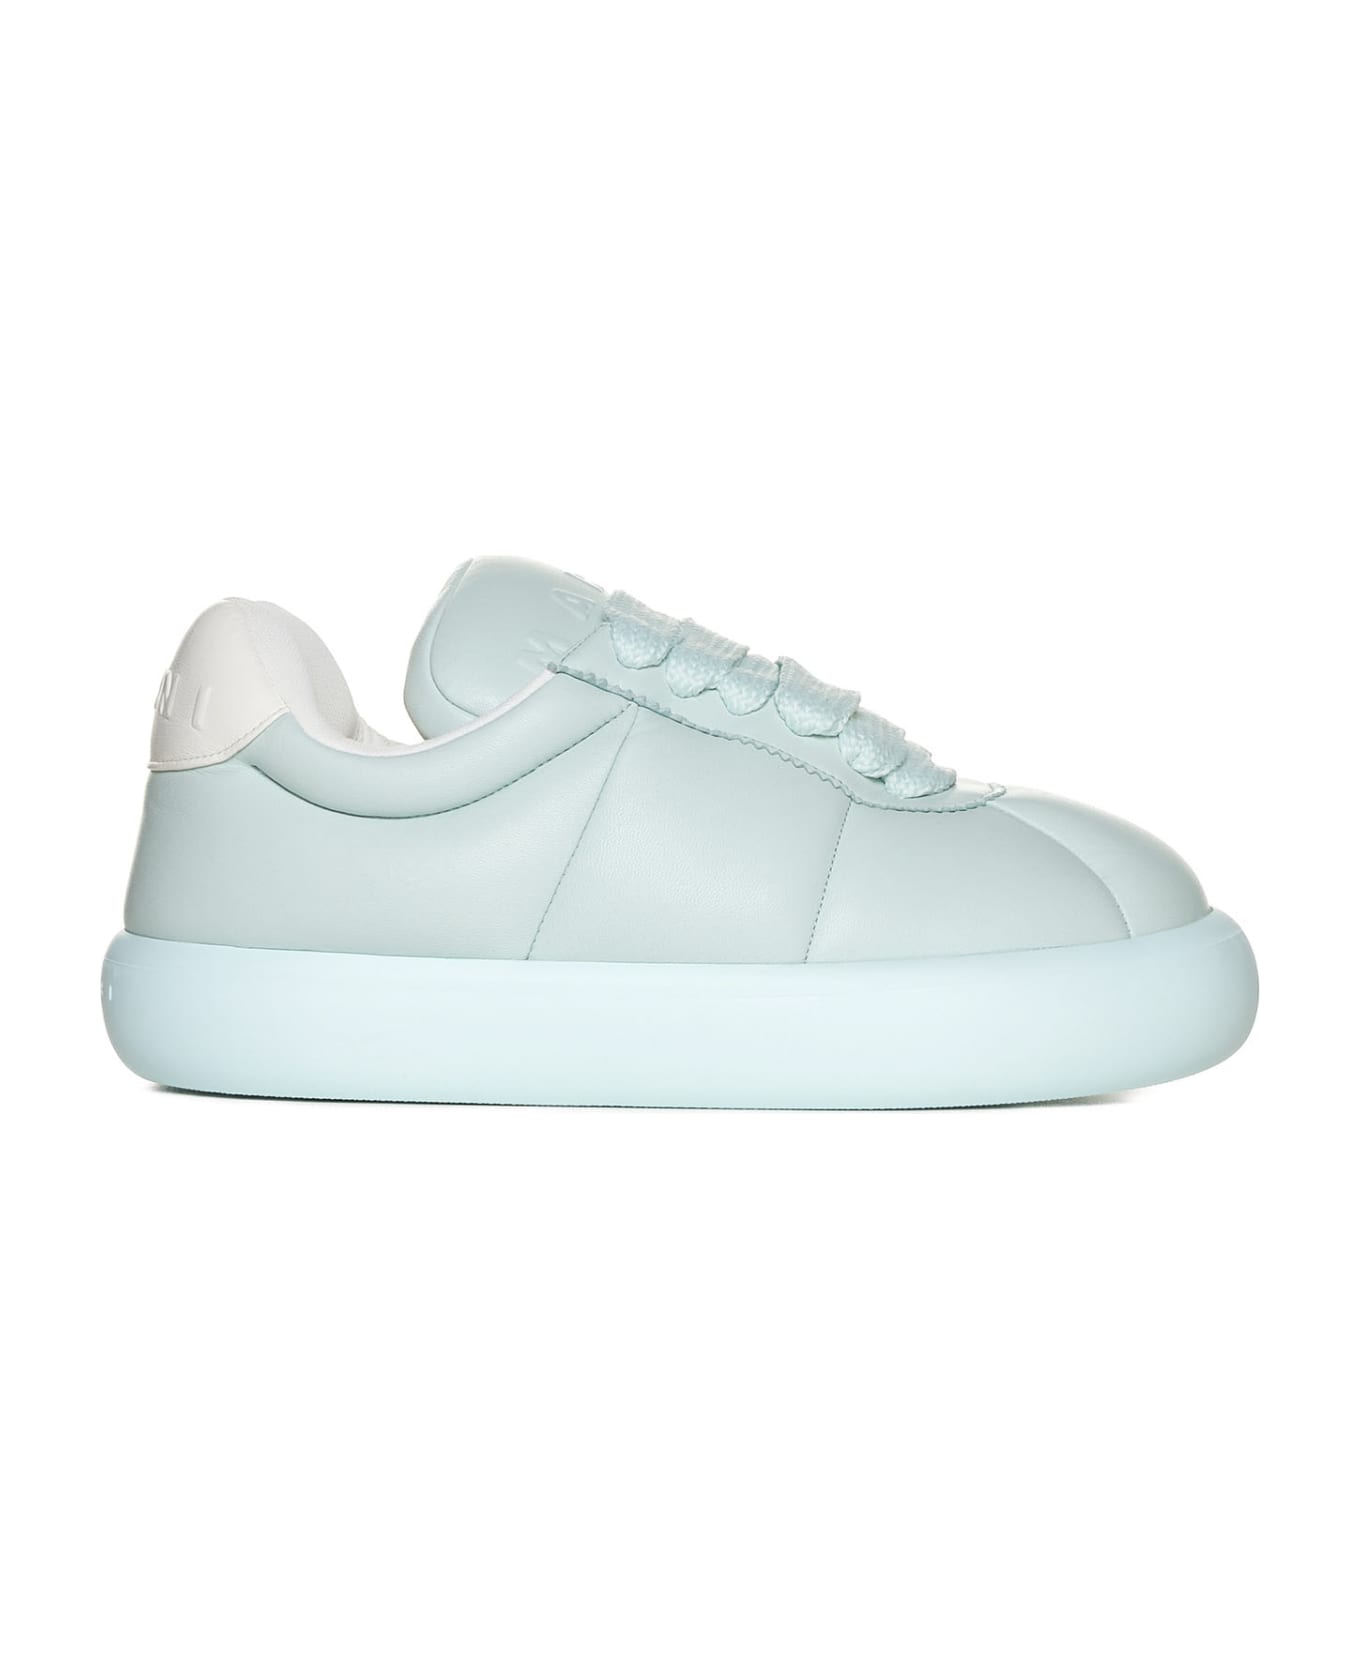 Marni Sneakers - Mineral ice